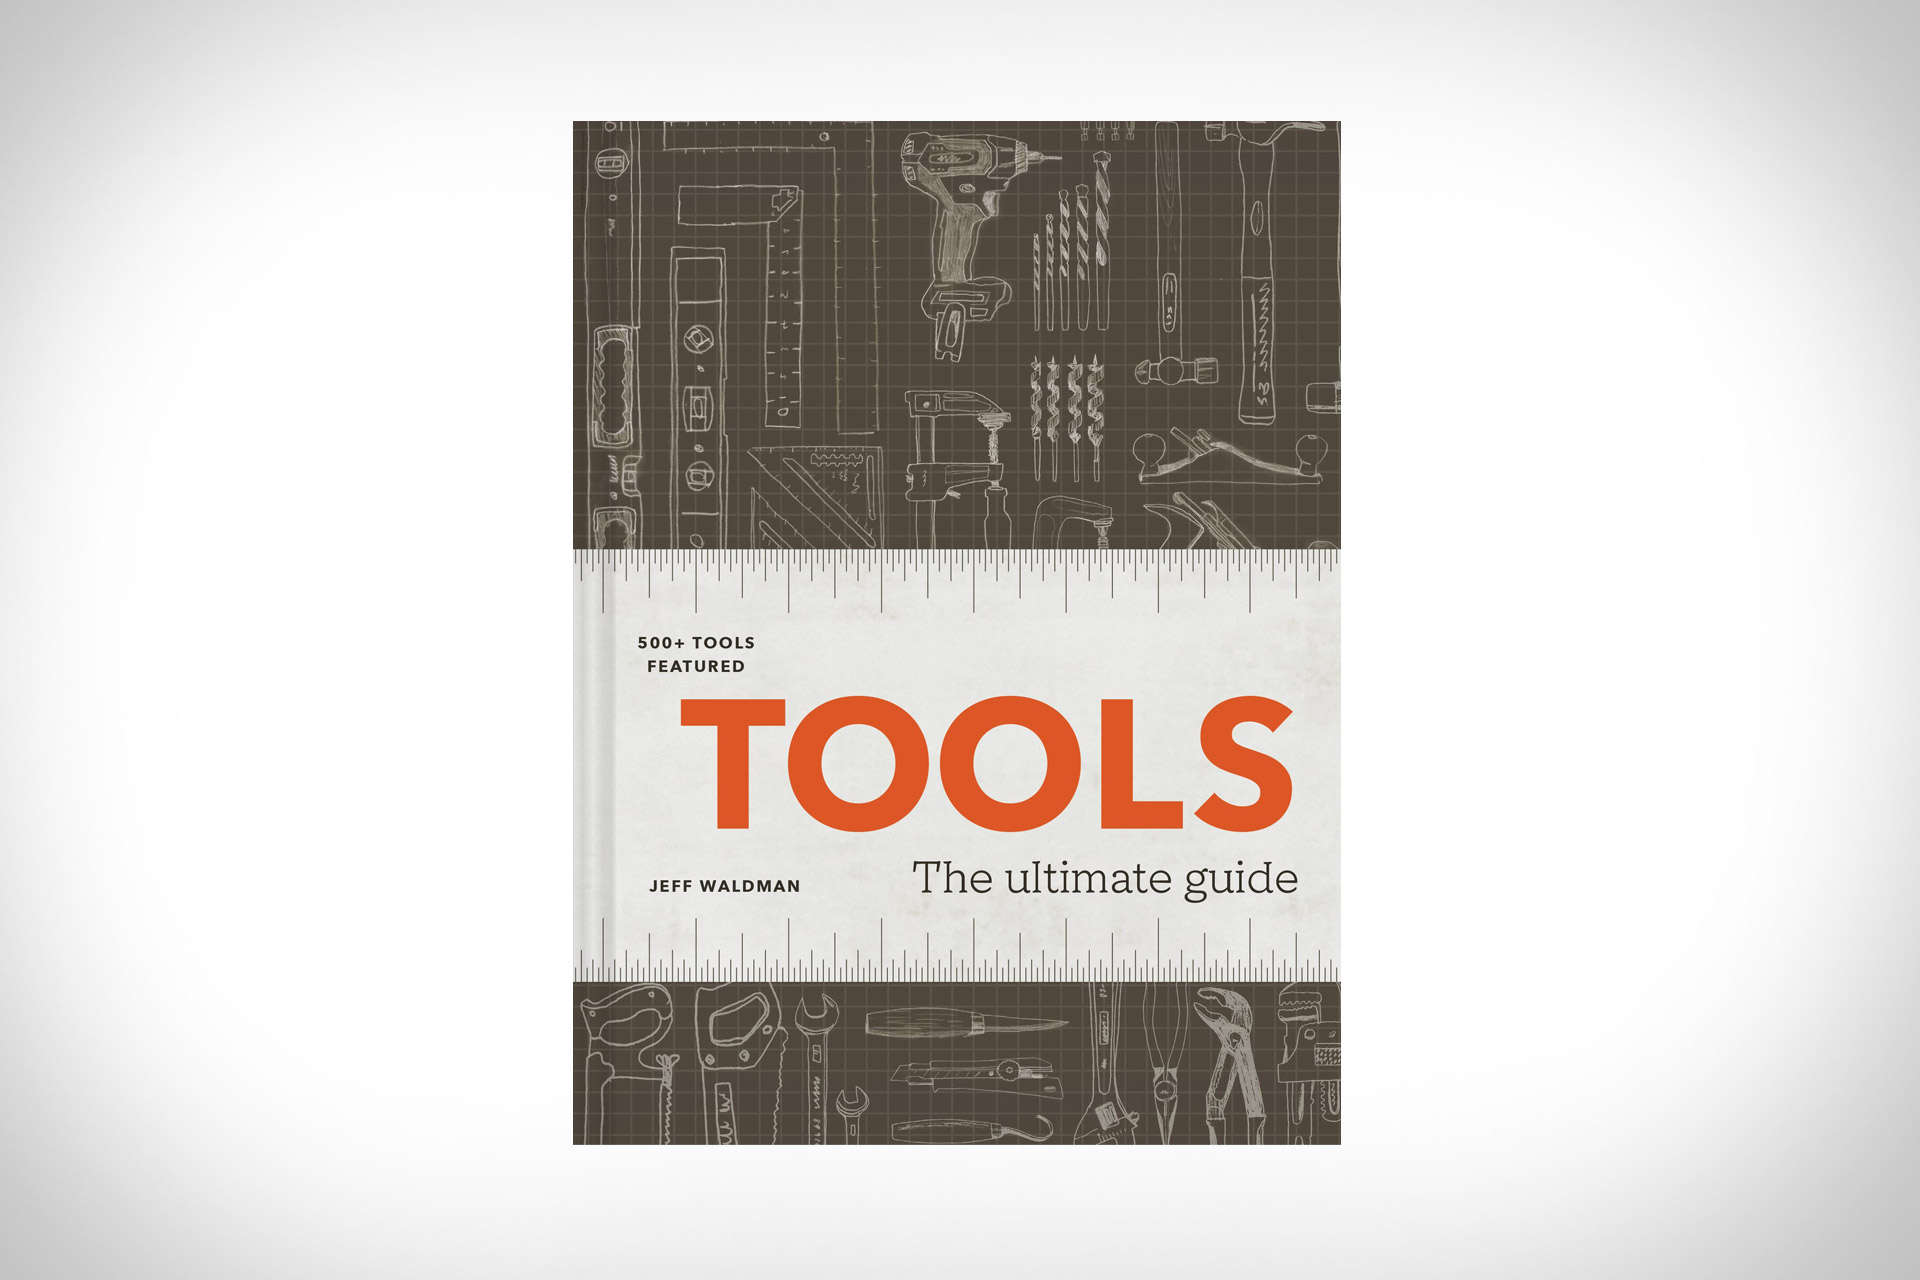 Tools: The Ultimate Guide | Uncrate, #Tools #Ultimate #Guide #Uncrate